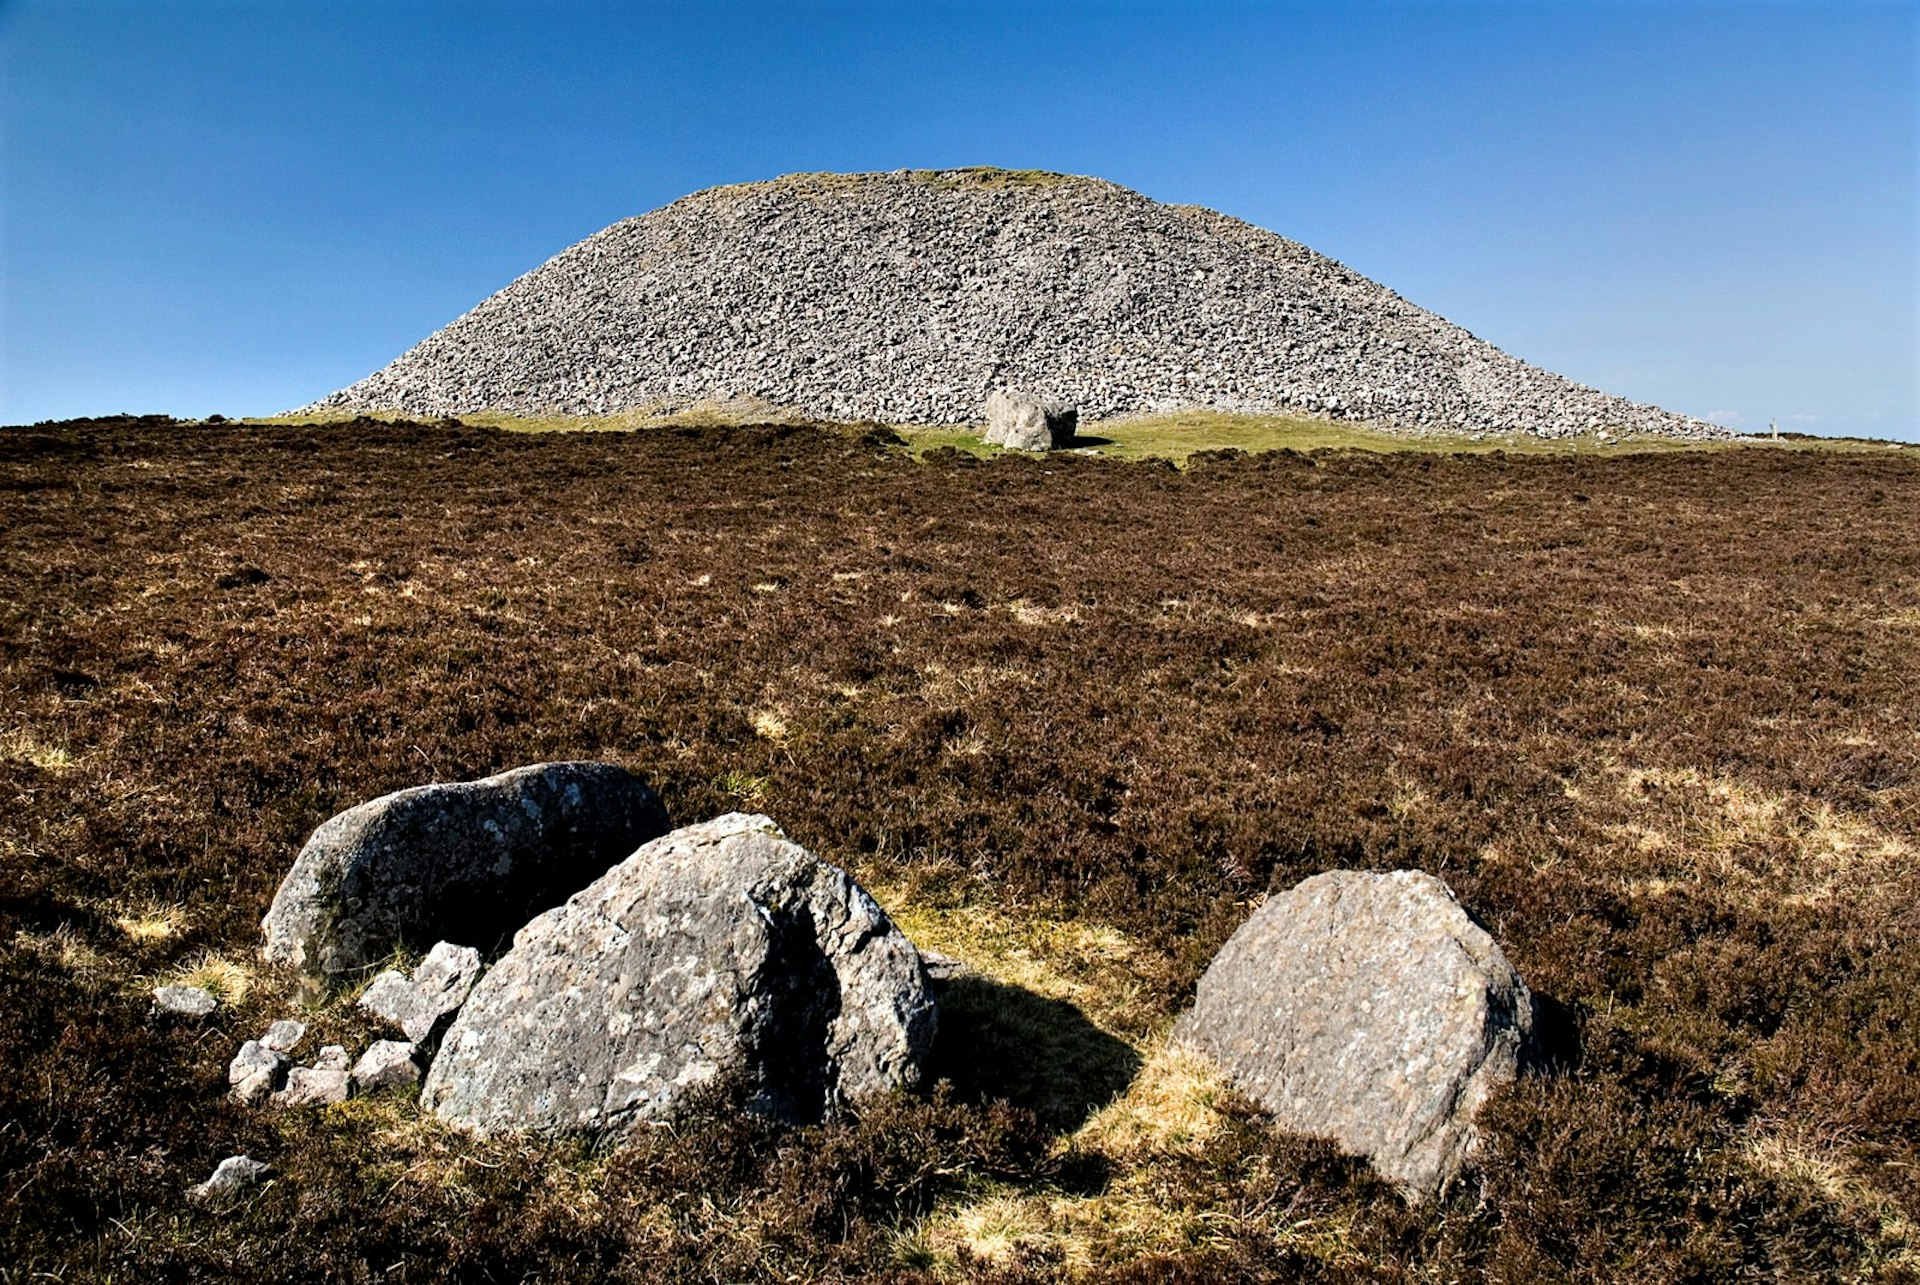 The large cairn on top of Knocknarea mountain is said to be the grave of Queen Medb.